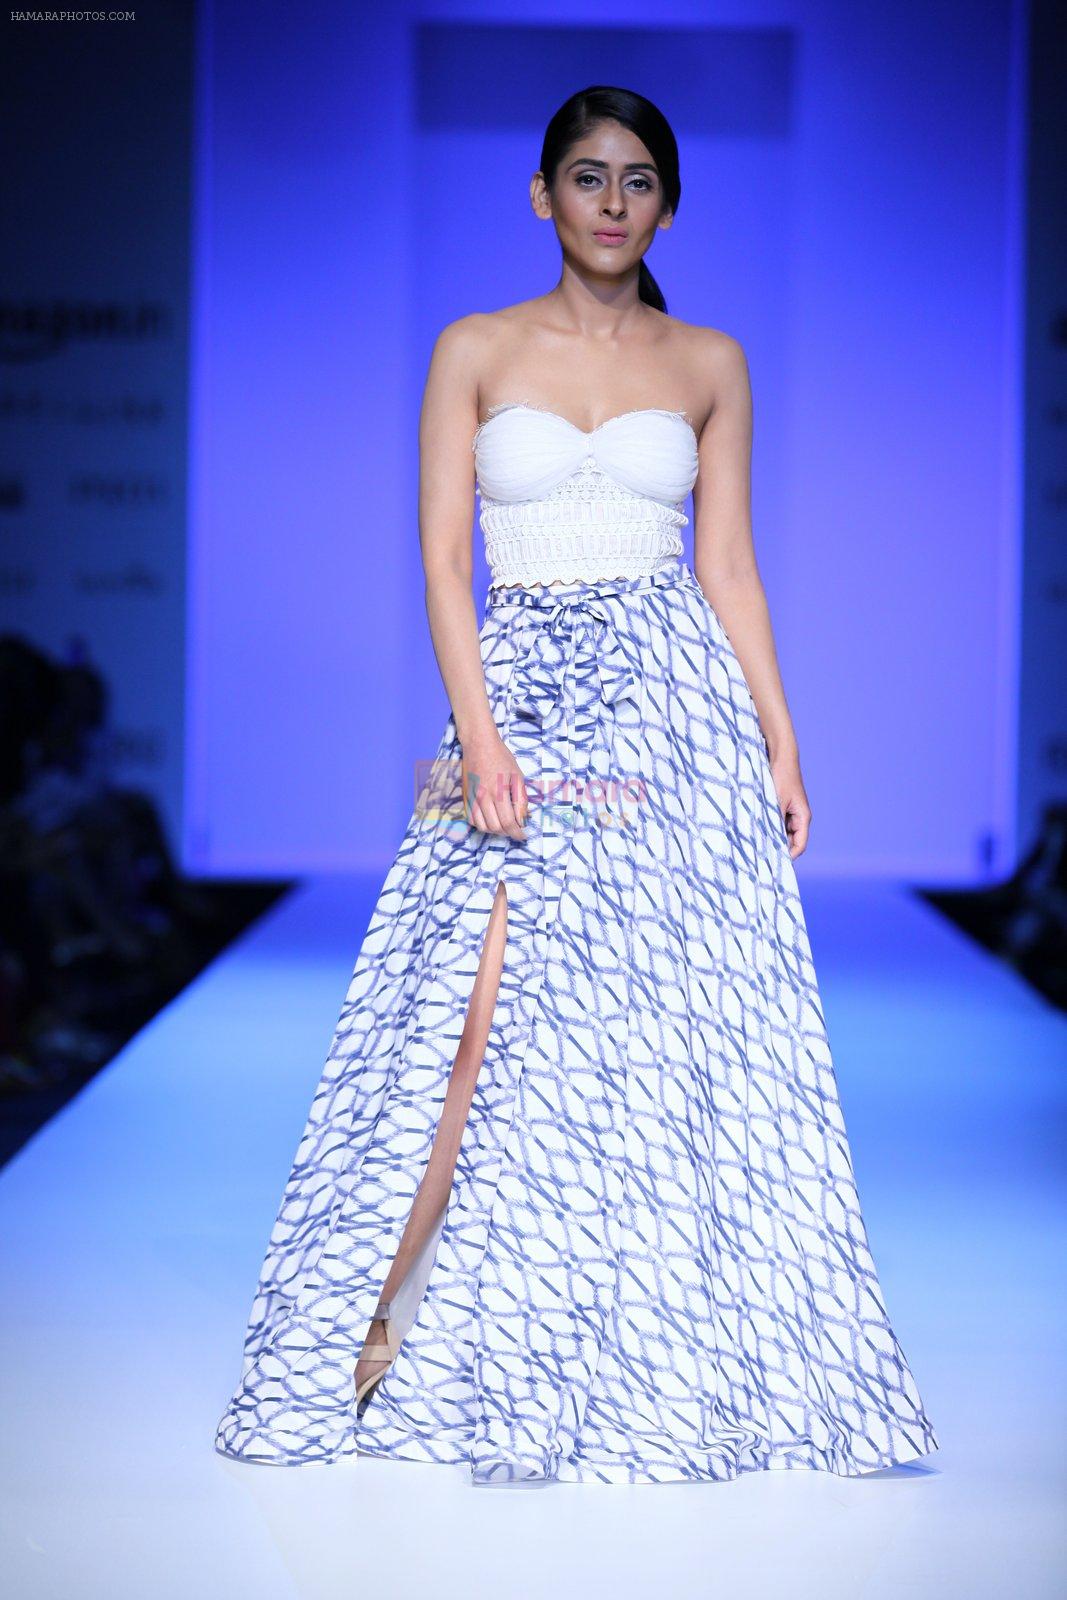 Model walk the ramp for Nikhita Show at Amazon Fashion Week Day 3 on 9th Oct 2015